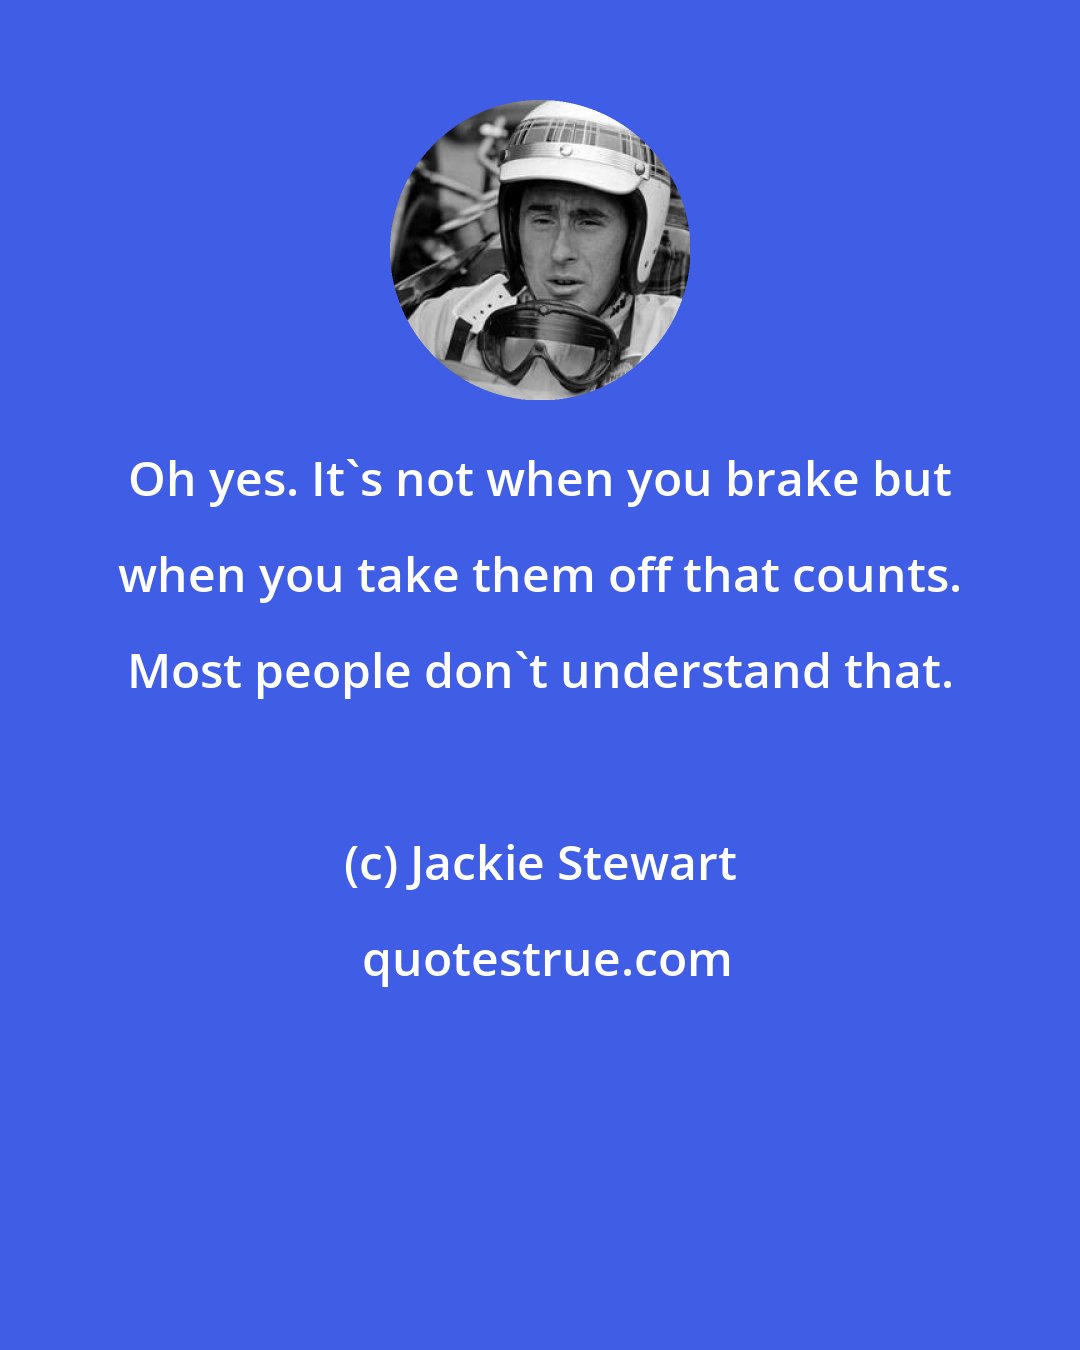 Jackie Stewart: Oh yes. It's not when you brake but when you take them off that counts. Most people don't understand that.